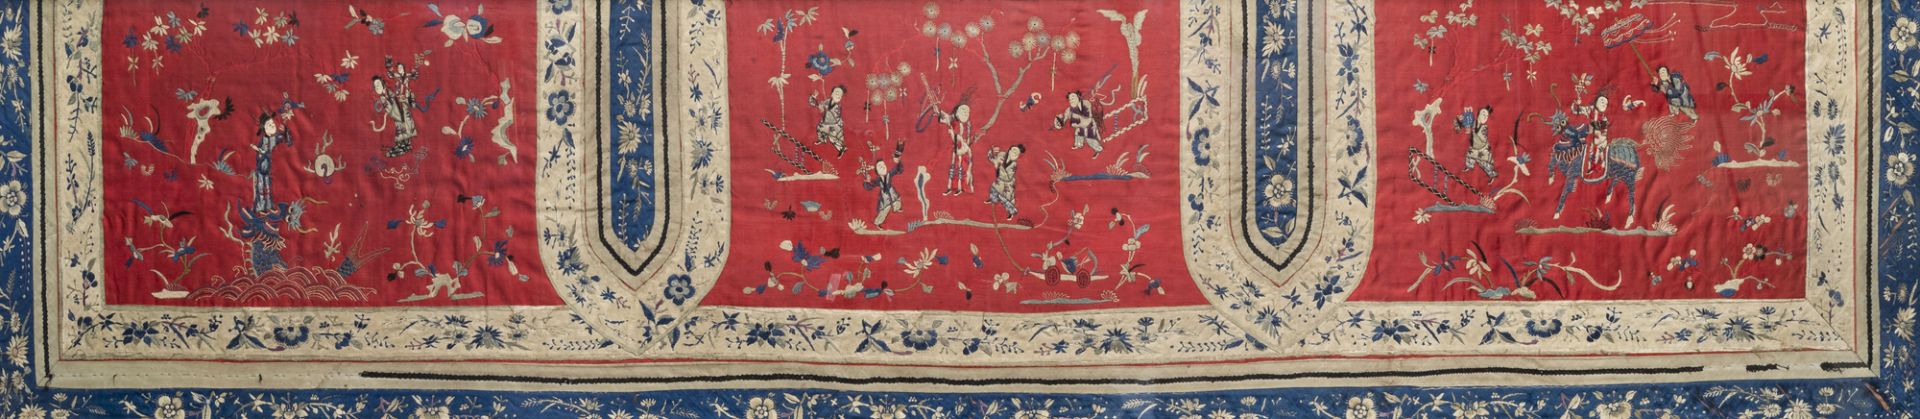 A Chinese framed embroidered altar cloth with playing children and floral design, 19th C. - Image 3 of 6